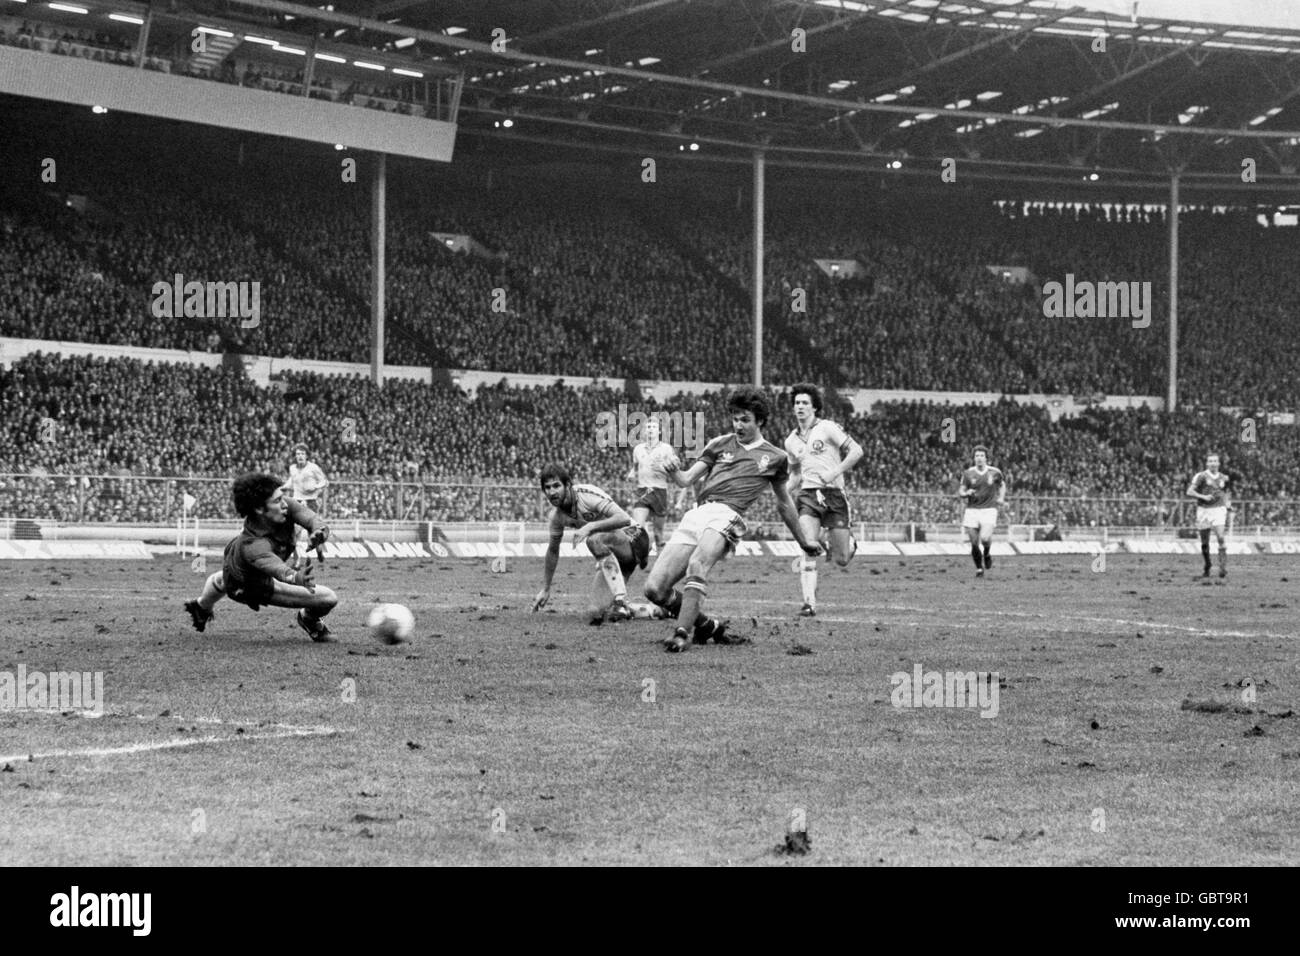 Nottingham Forest's Garry Birtles (third l) slides the ball past Southampton goalkeeper Terry Gennoe (l) to score his, and his team's, second goal as Southampton's Chris Nicholl (second l) looks on Stock Photo